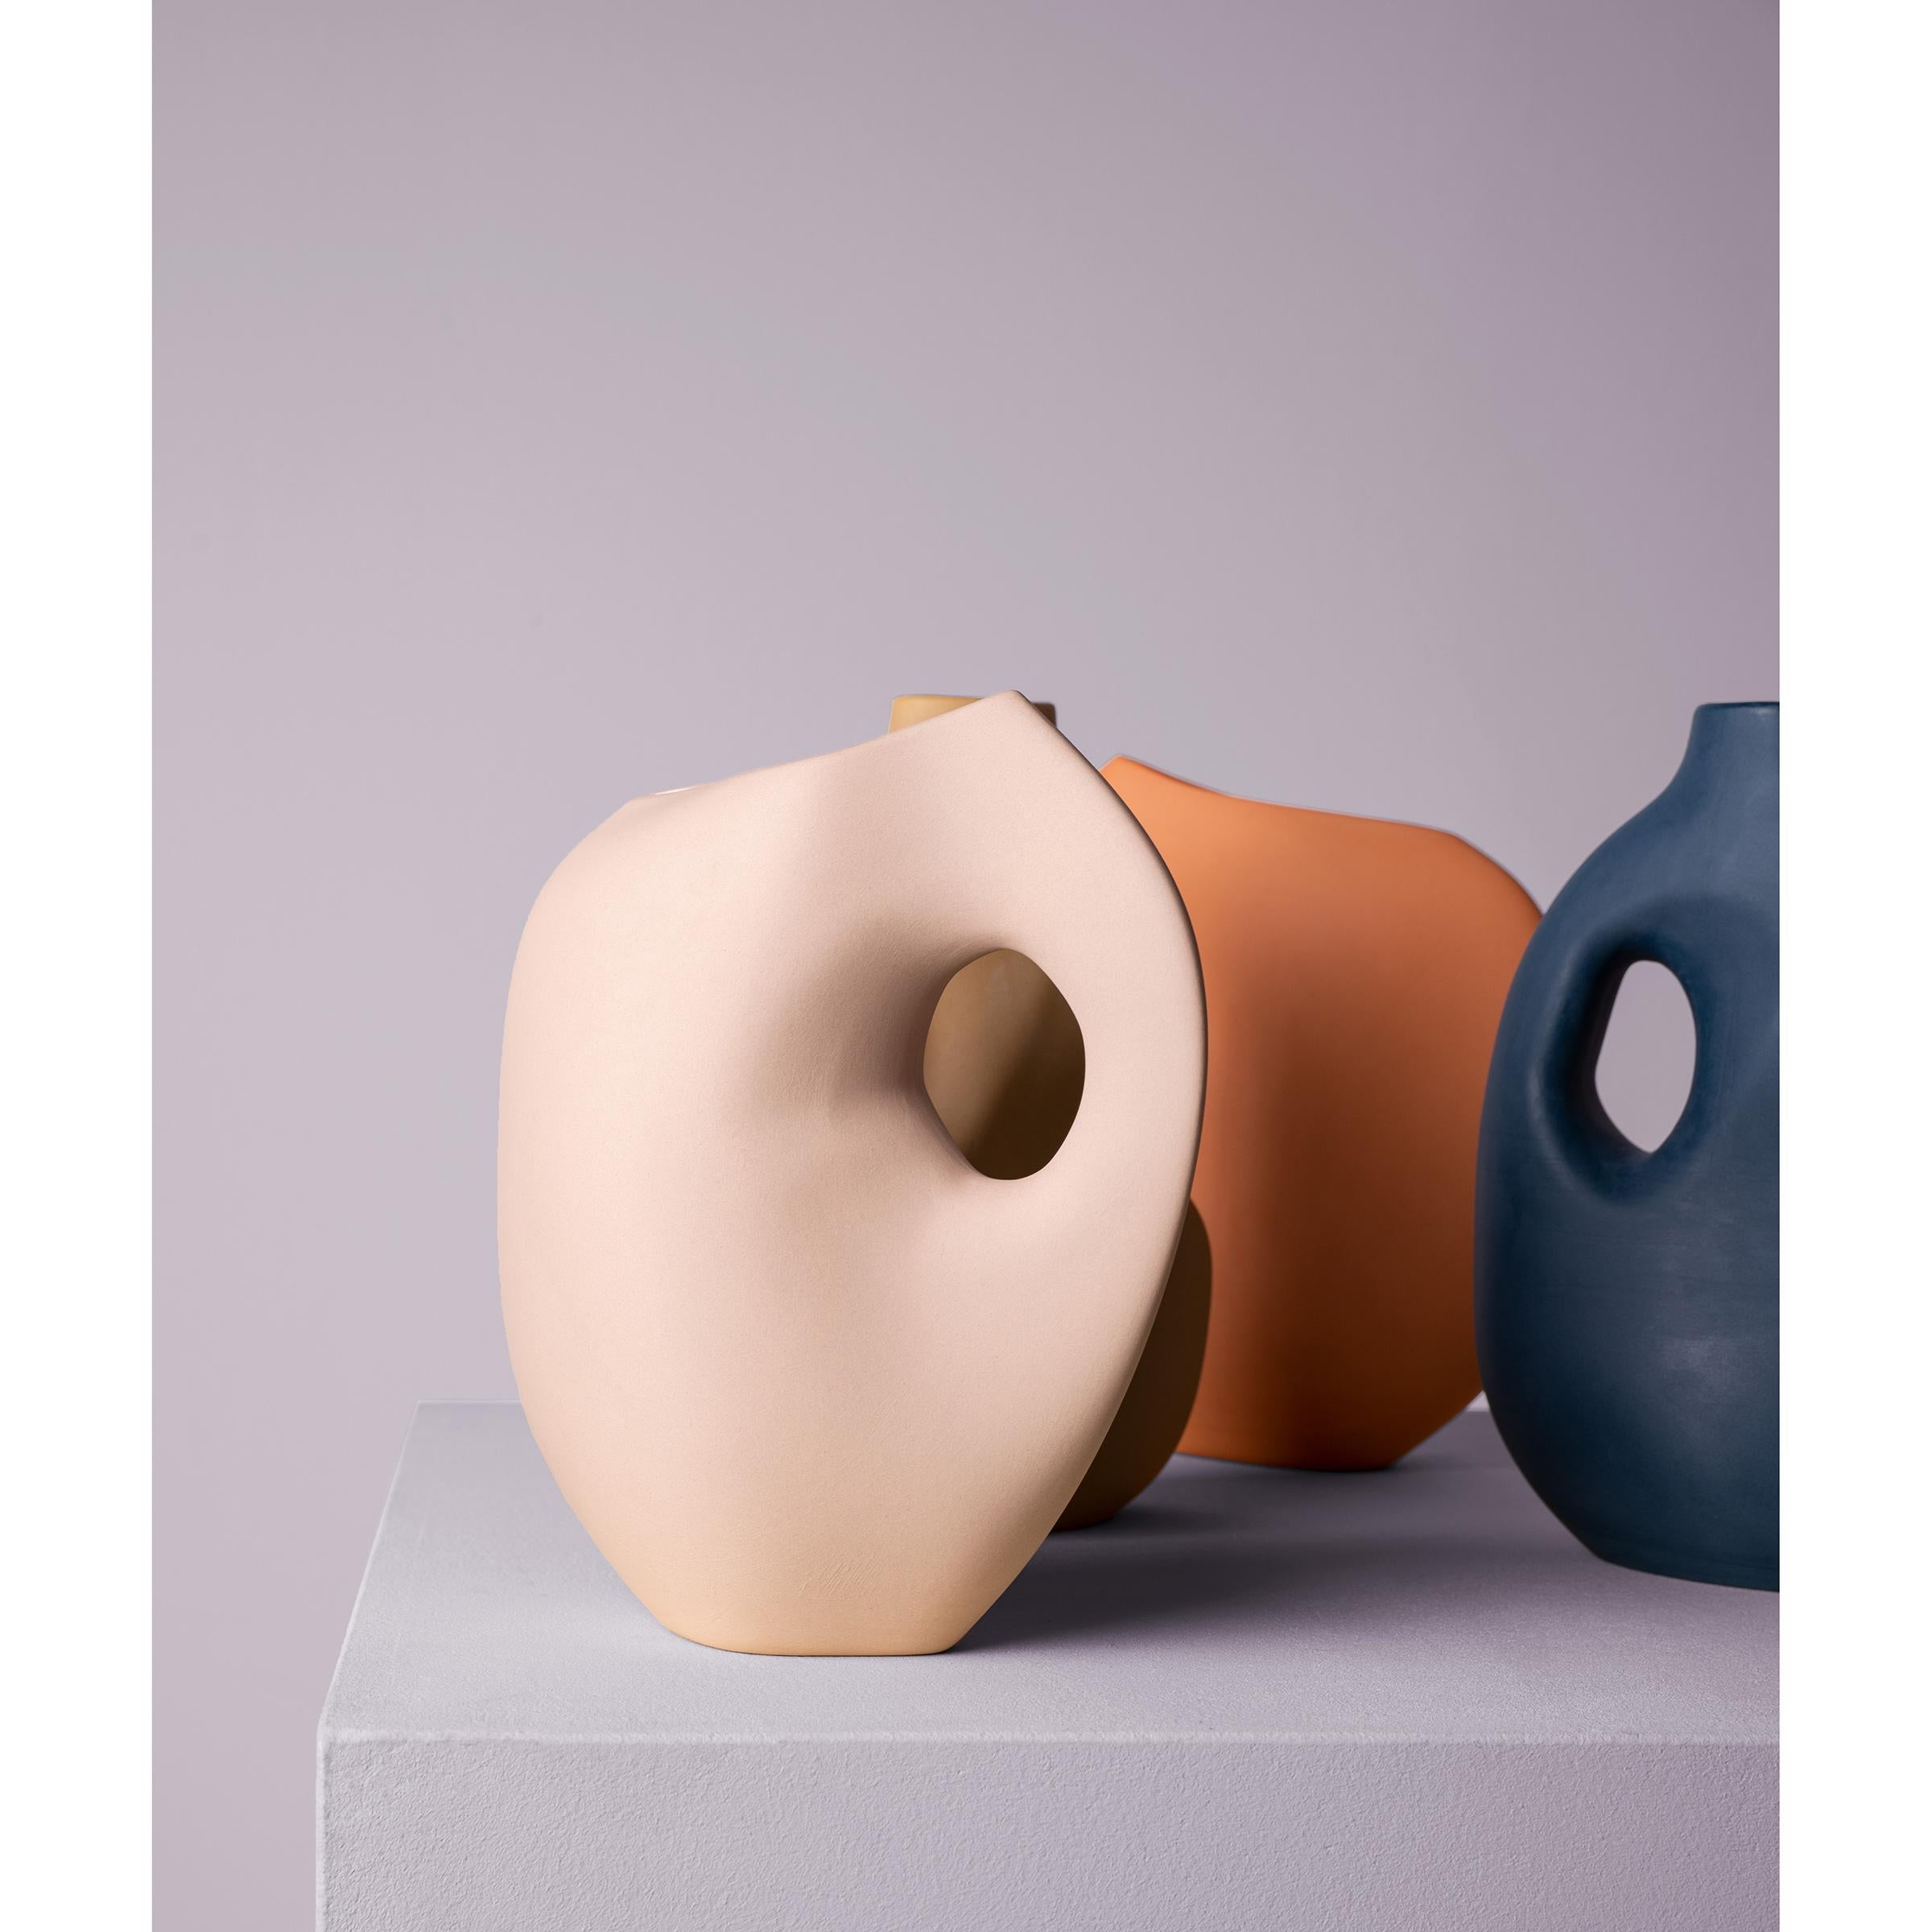 Expressive and soft in their forms, the imaginative Aura vases emerge from a poetic reflection on the curves of the female figure. Through a raw sensuous surface, the intense hues and varied tones of rich or subdued colors get a quiet but tense